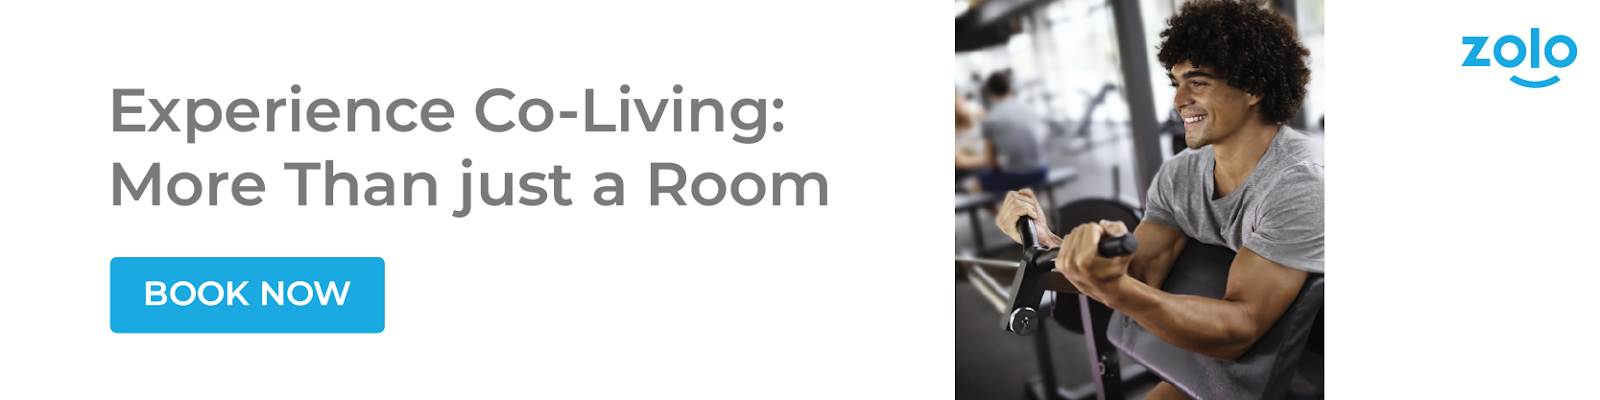 Experience Co-living: More than just a room